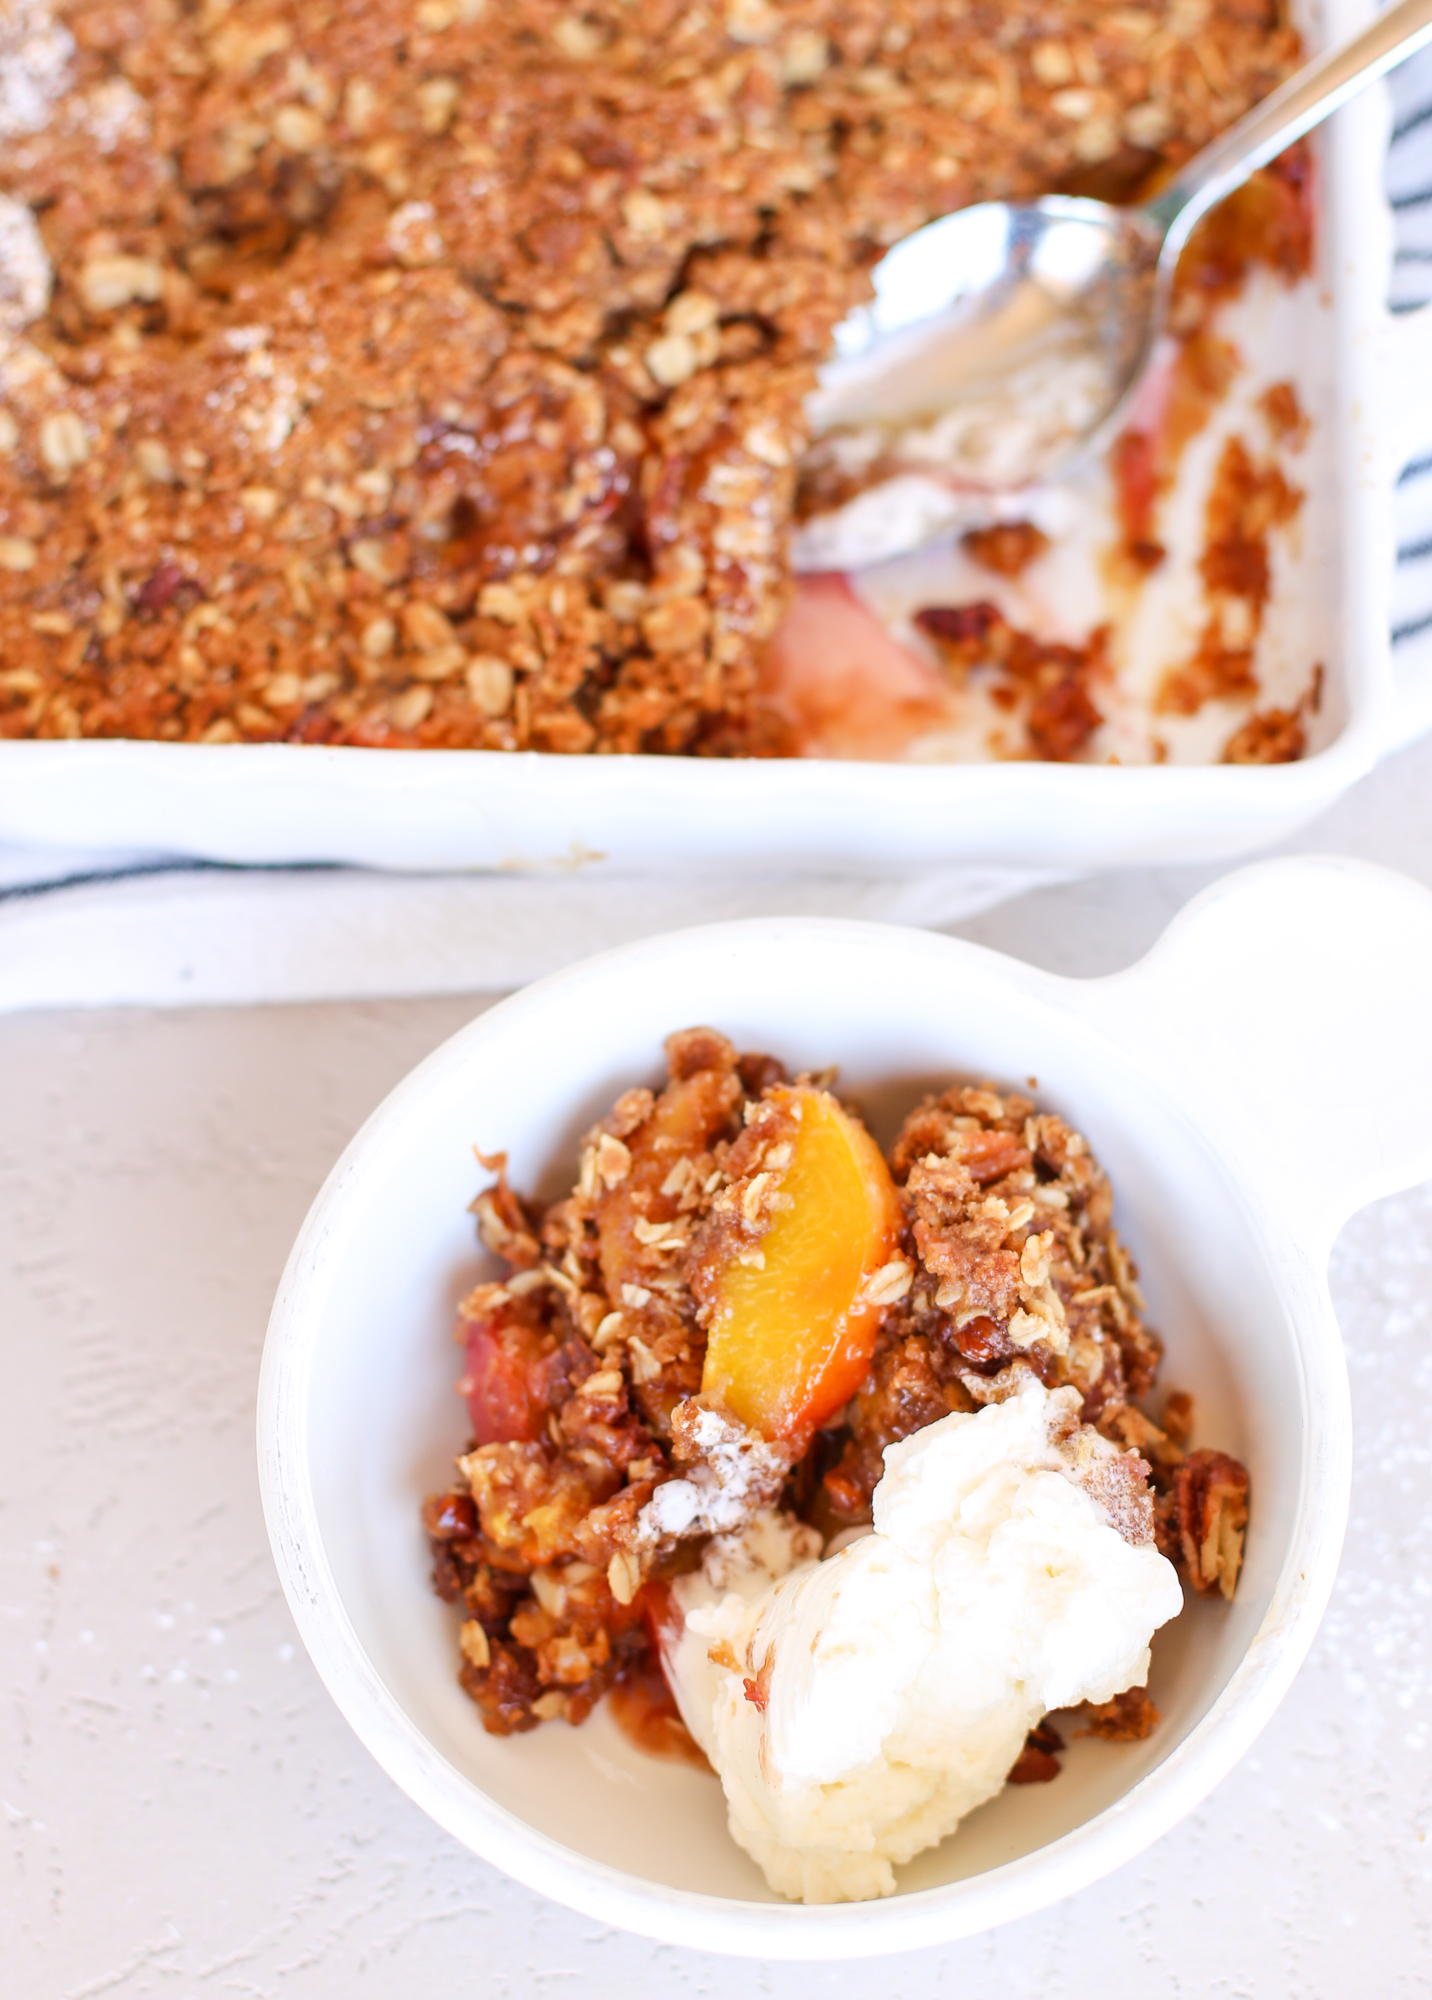 Peach crisp served in a white bowl with ice cream.